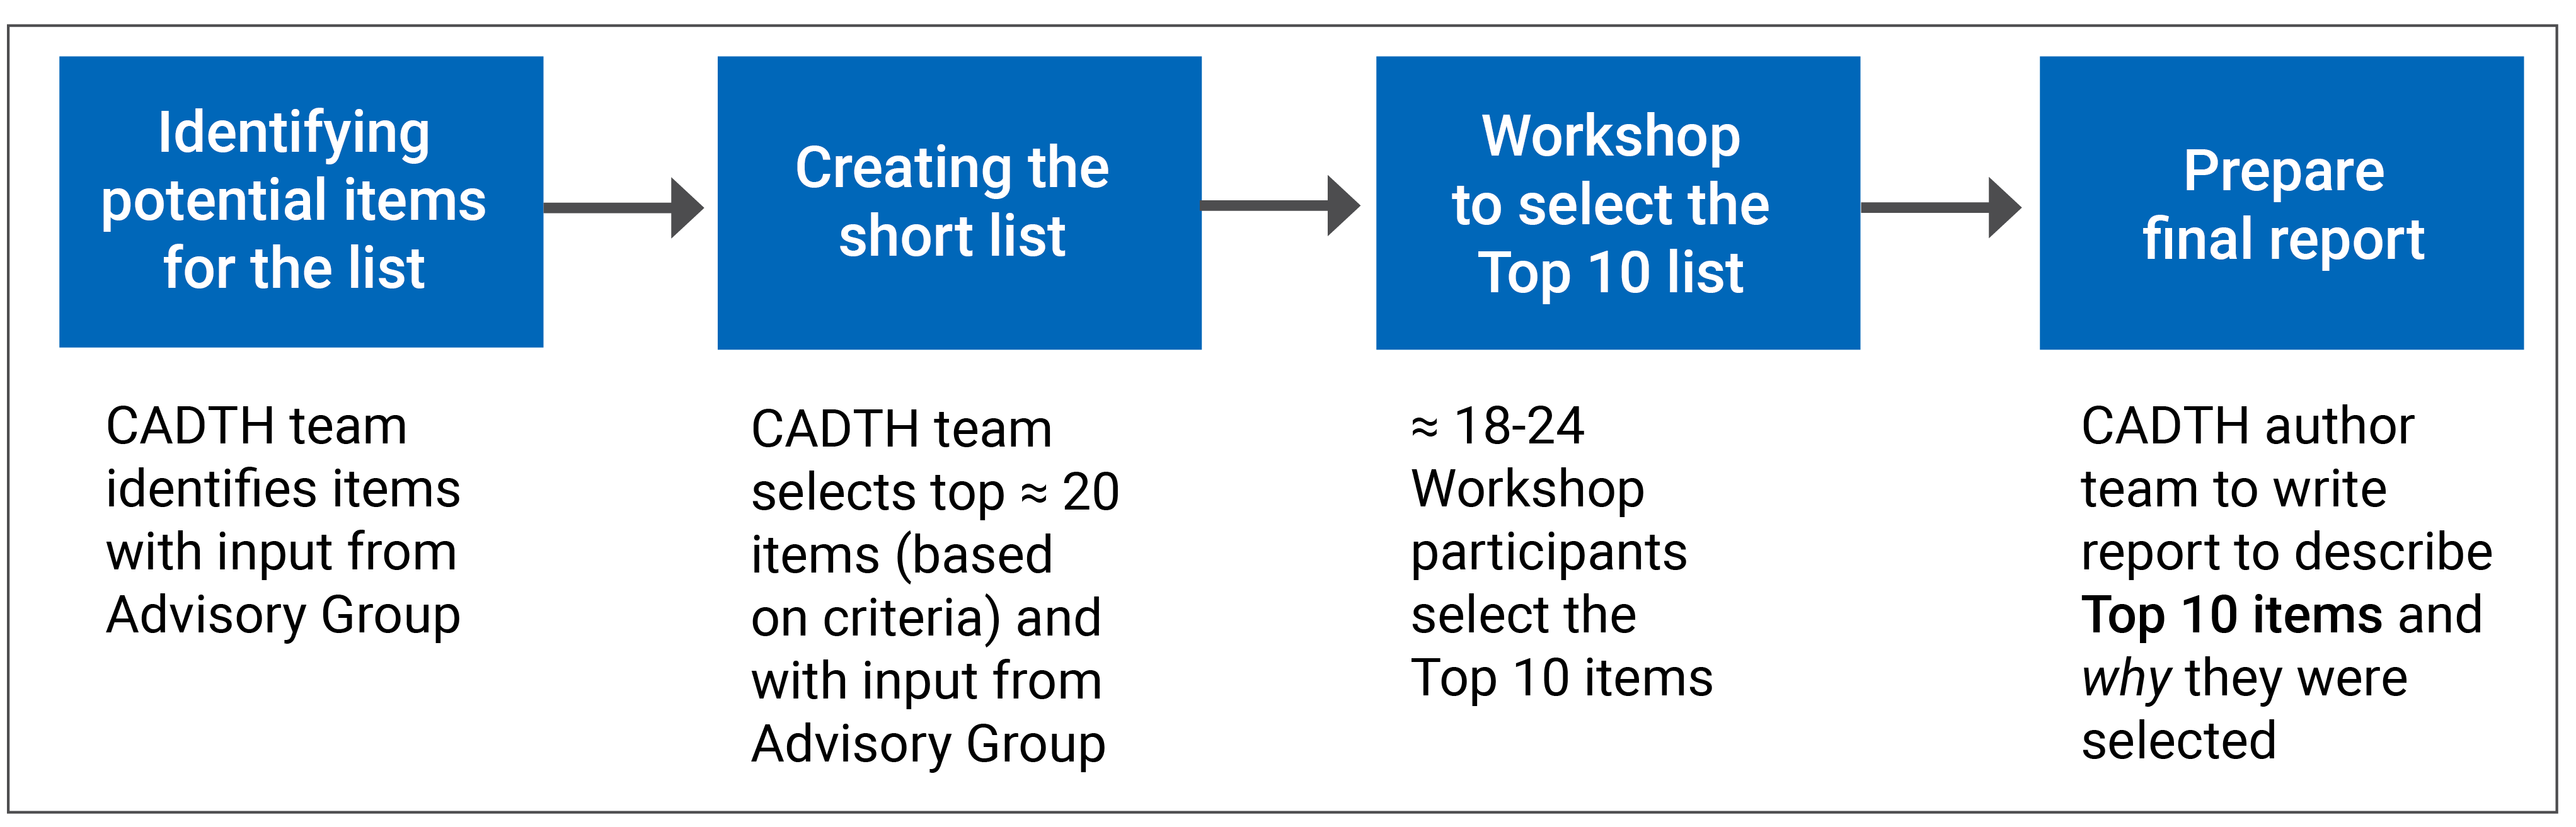 Alt text: A flow diagram showing the key steps used to develop the 2024 Watch List. A literature review and input from Advisory Group were used to identify items, approximately 20 items were selected based on criteria and input from the Advisory Group for the short list, a 17-member panel selected the top 10 list during a half-day workshop, and the final report of the top 10 items was written using literature findings and workshop discussions.